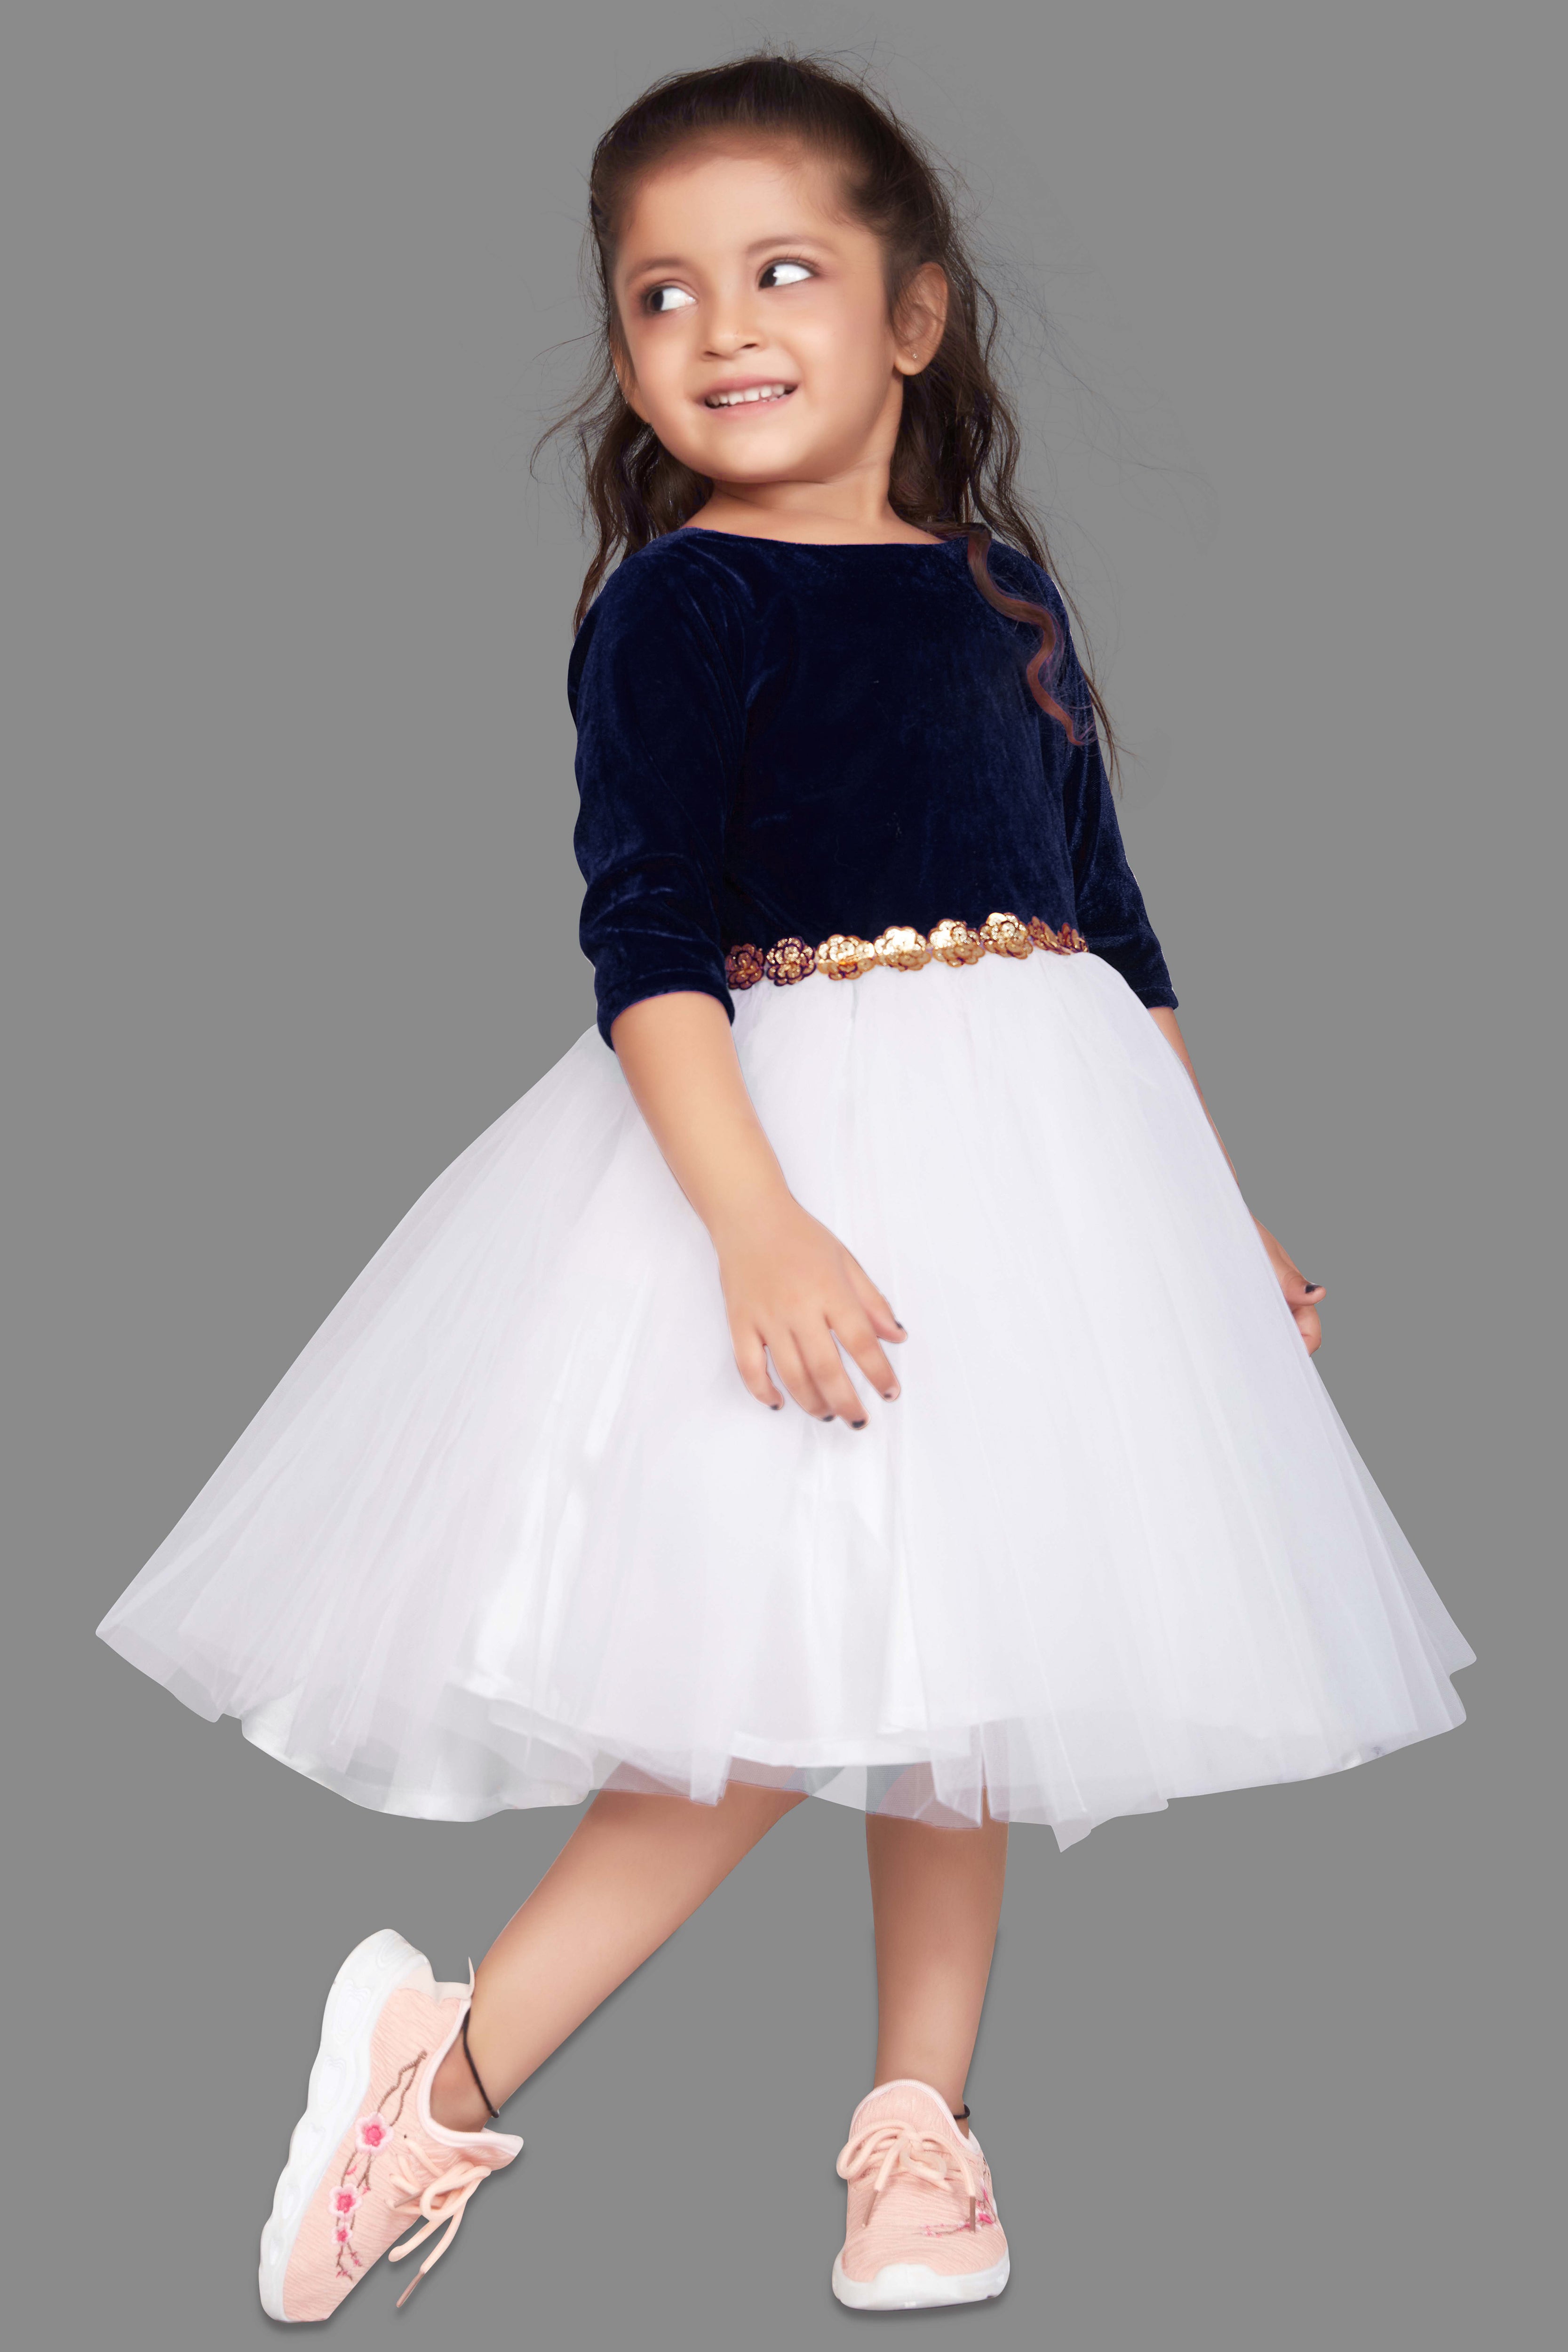 Half Sleeve Baby Frock Front Open Button Model, Premium Quality Cotton